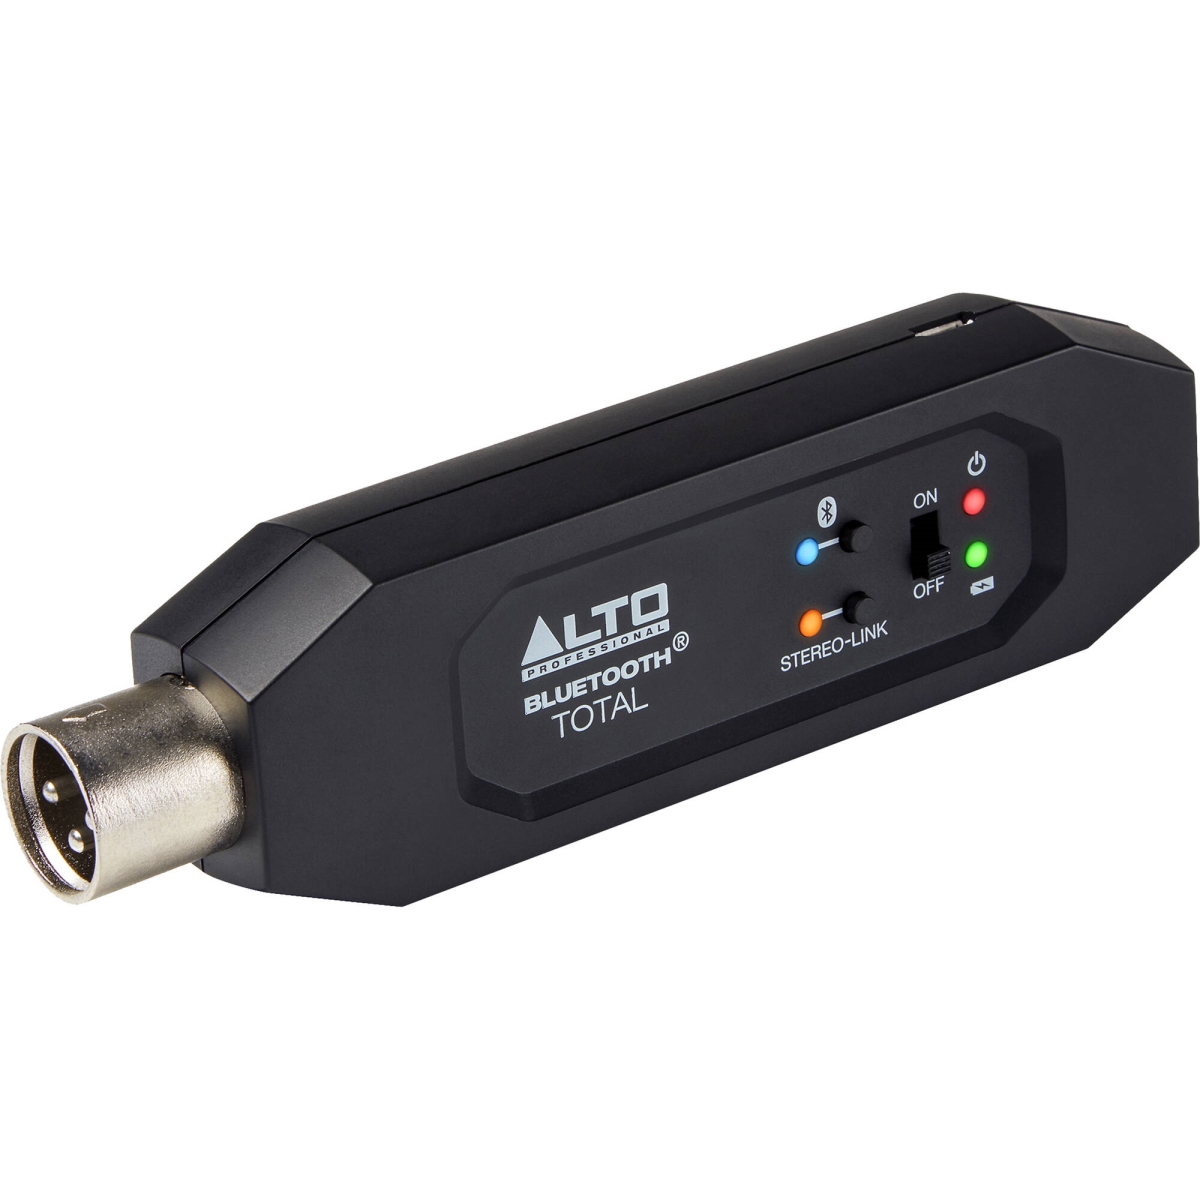 Picture of Alto BLUETOOTHTOTAL2 Bluetooth Total MKII Battery-Powered Receiver